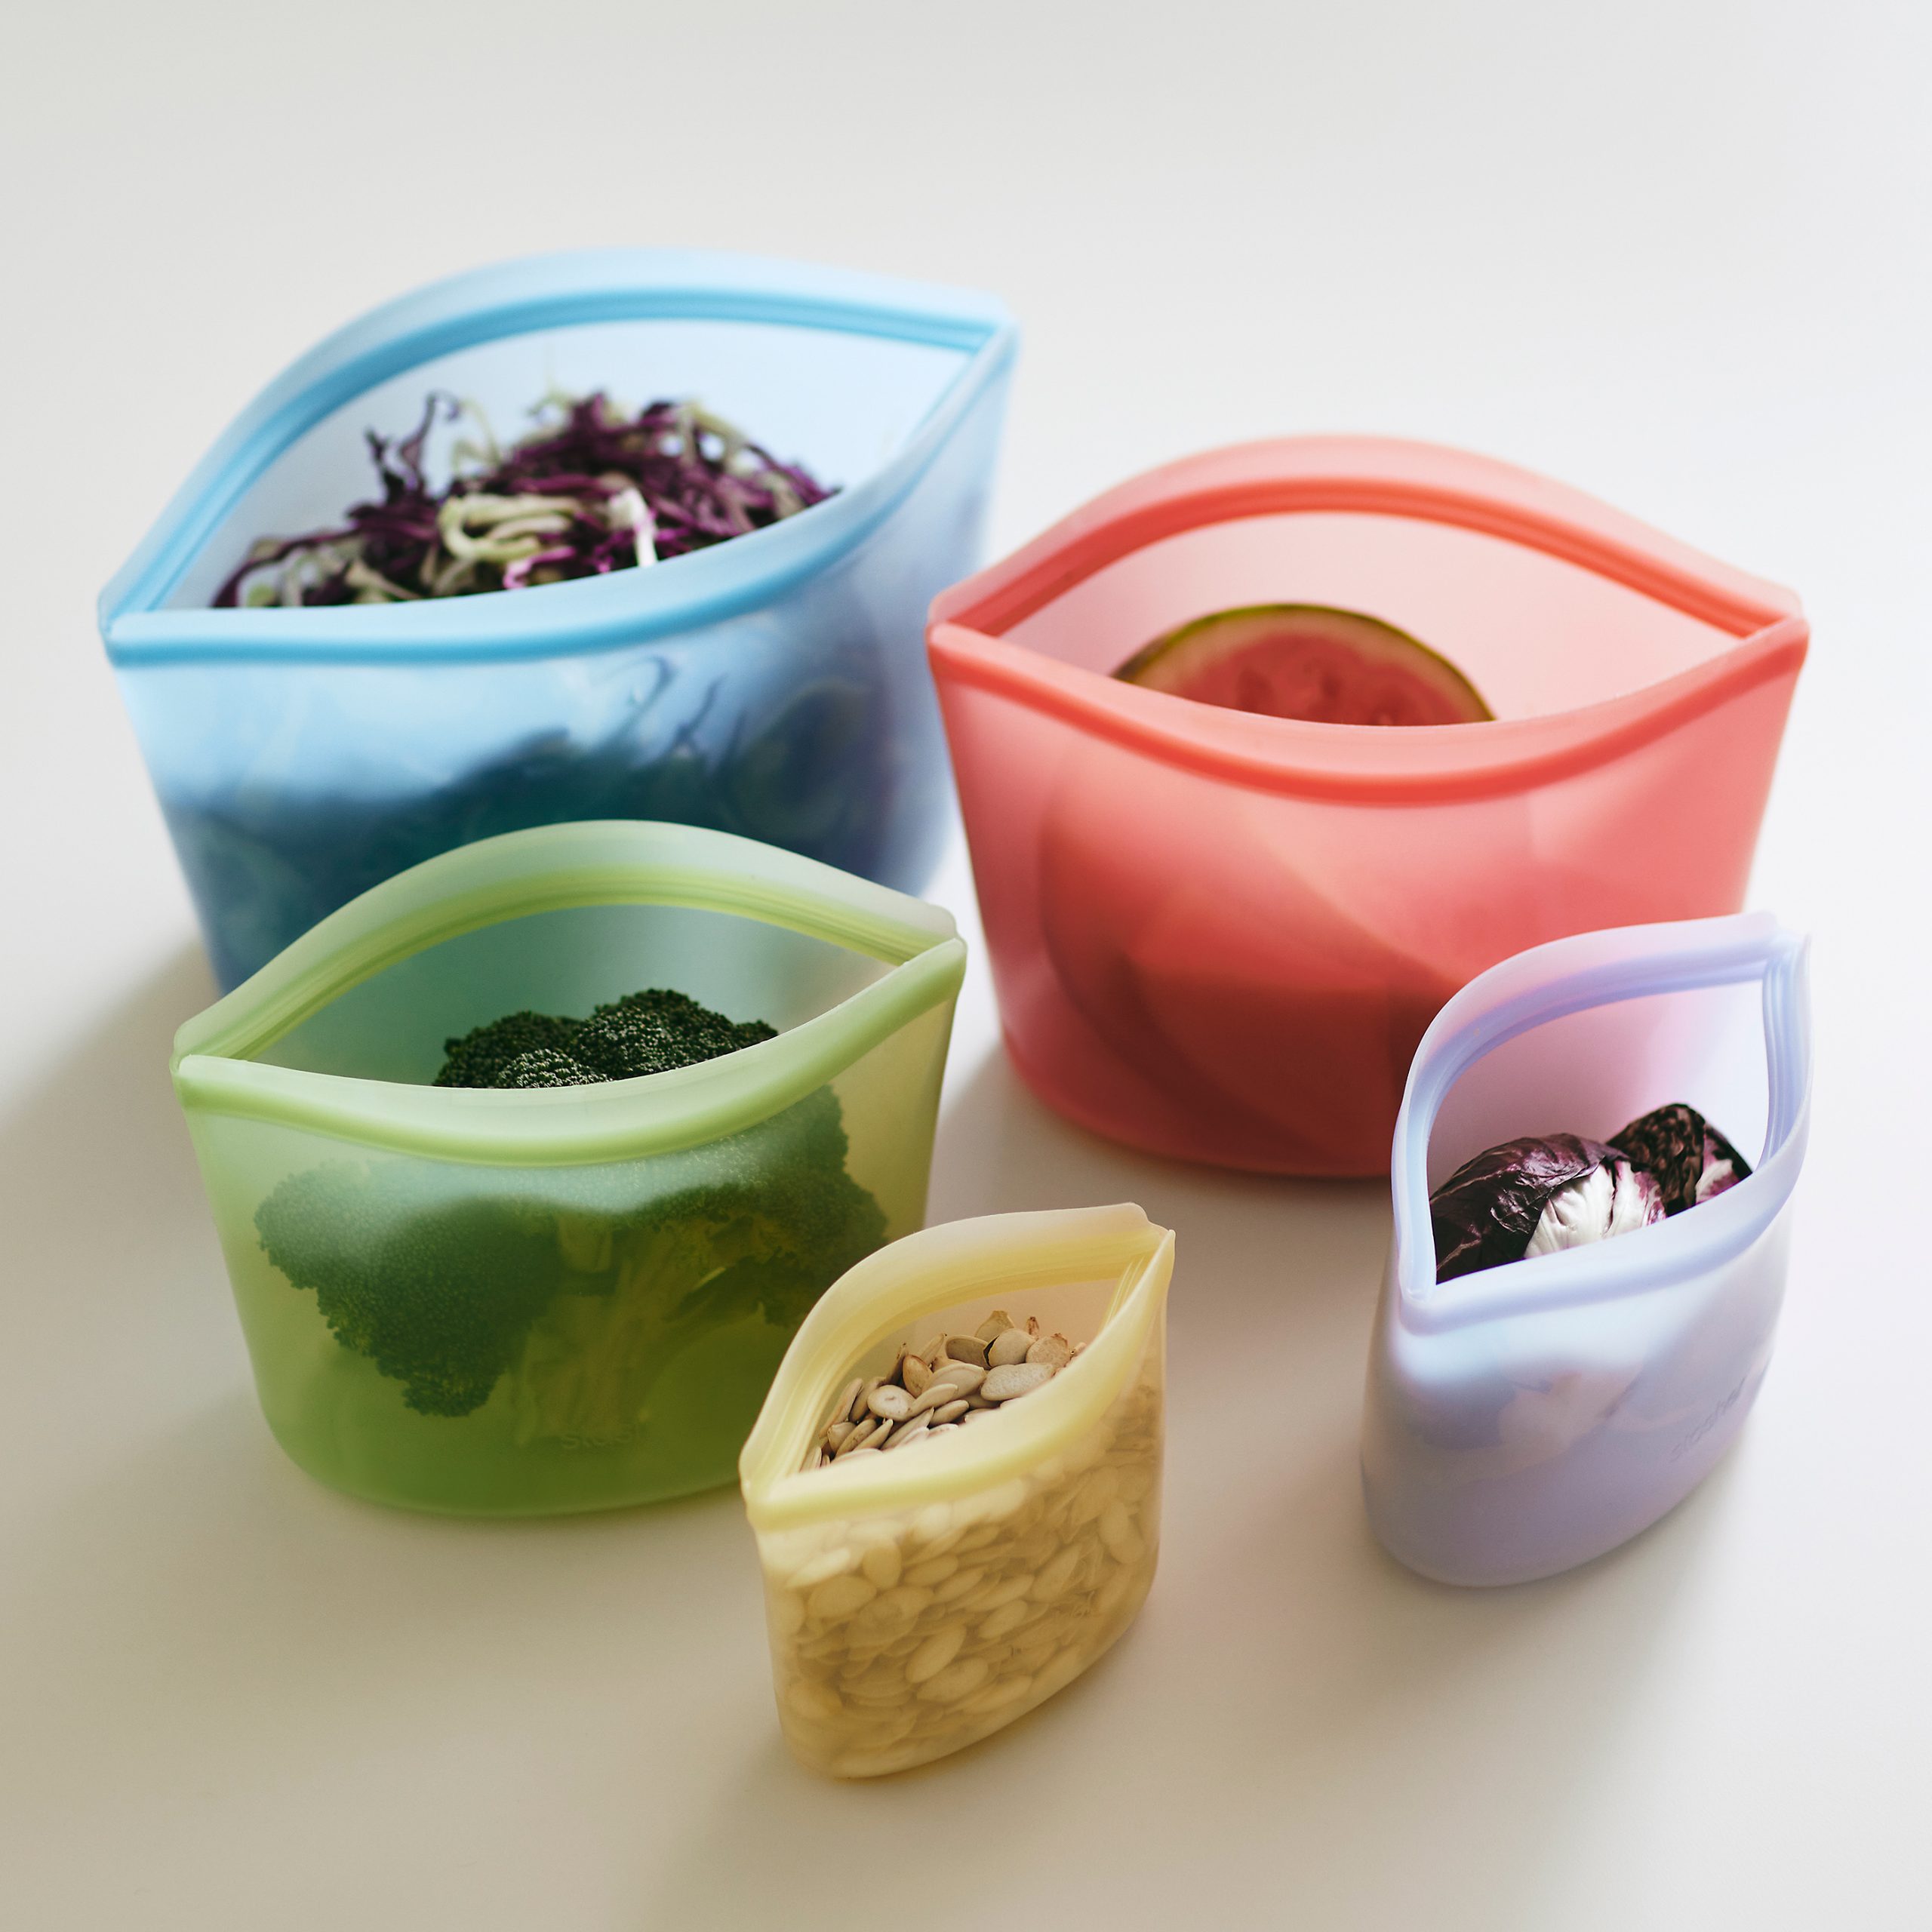 Stasher Launches On-the-Go Bowls Innovation - Kitchenware News & Housewares  ReviewKitchenware News & Housewares Review